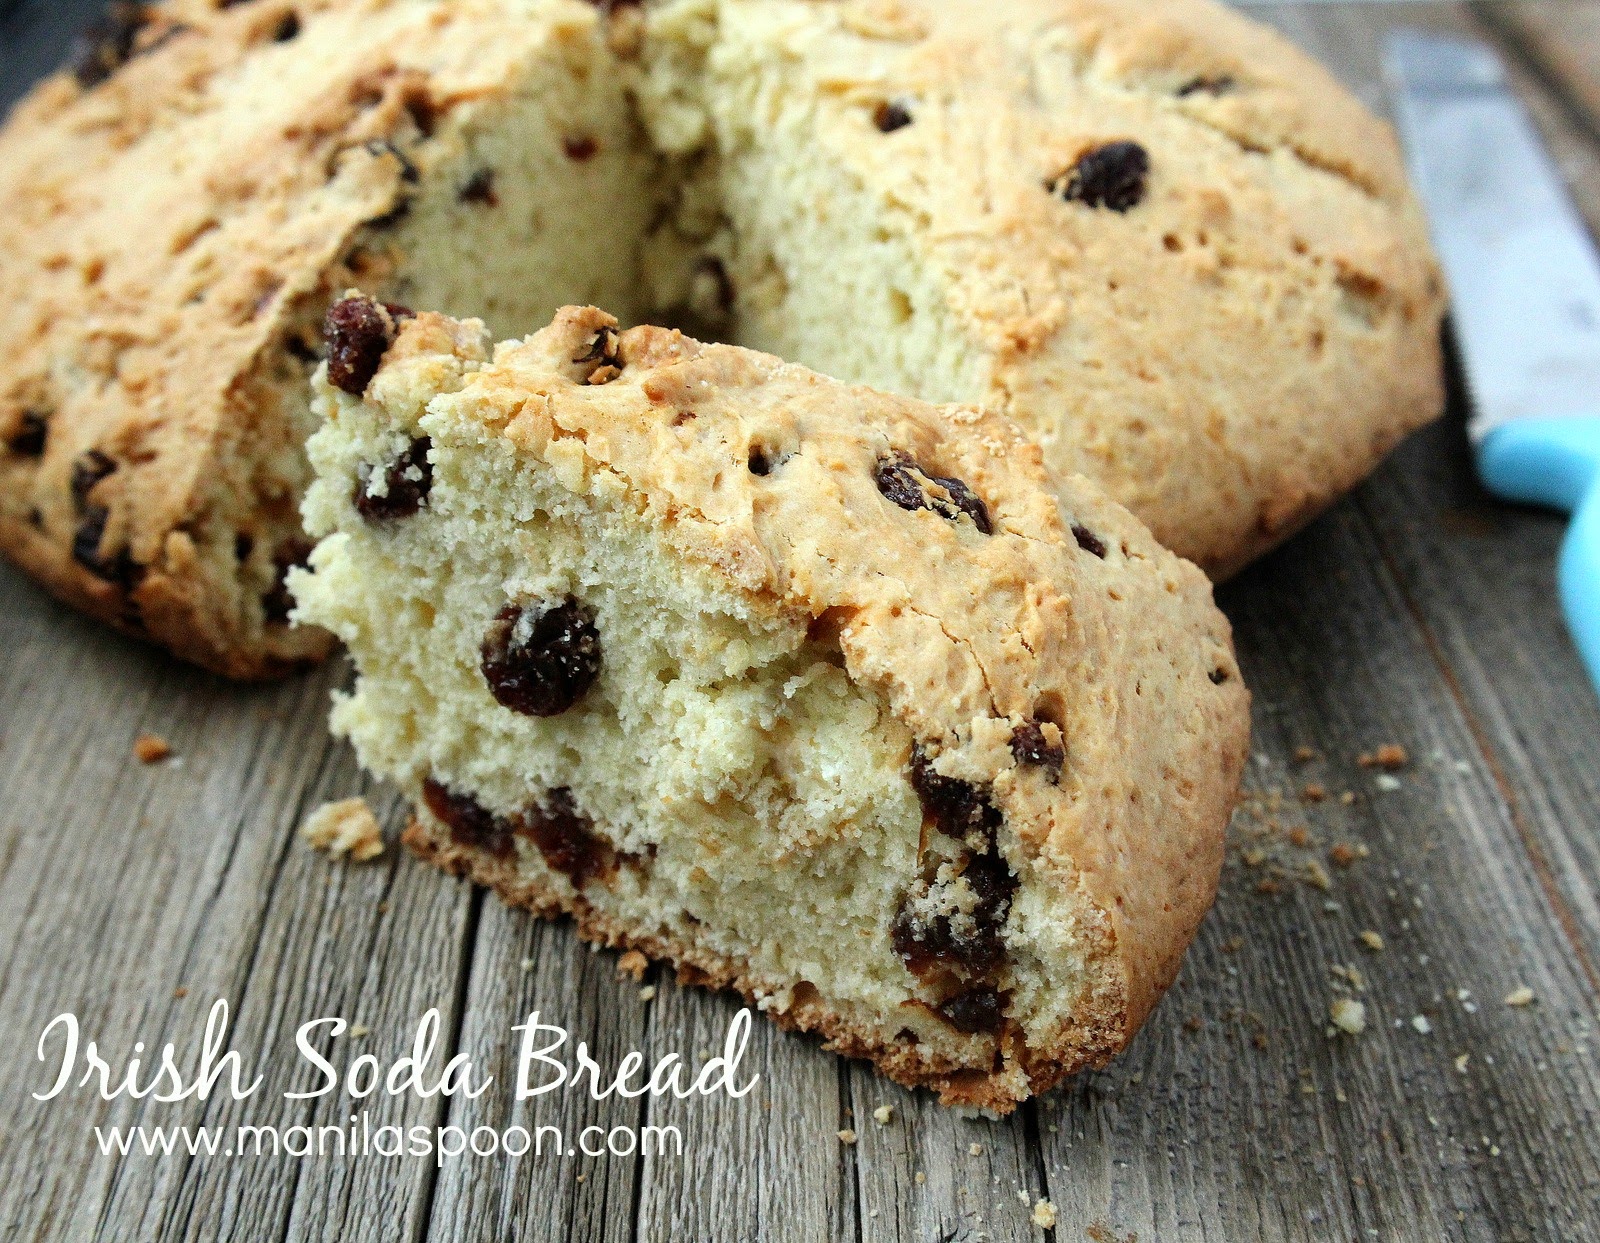  It doesn't require much effort to make this delicious Irish Soda Bread made even more flavorful with the addition of sweet raisins. Enjoy for tea time or with your coffee. SO GOOD!! #irish #sodabread